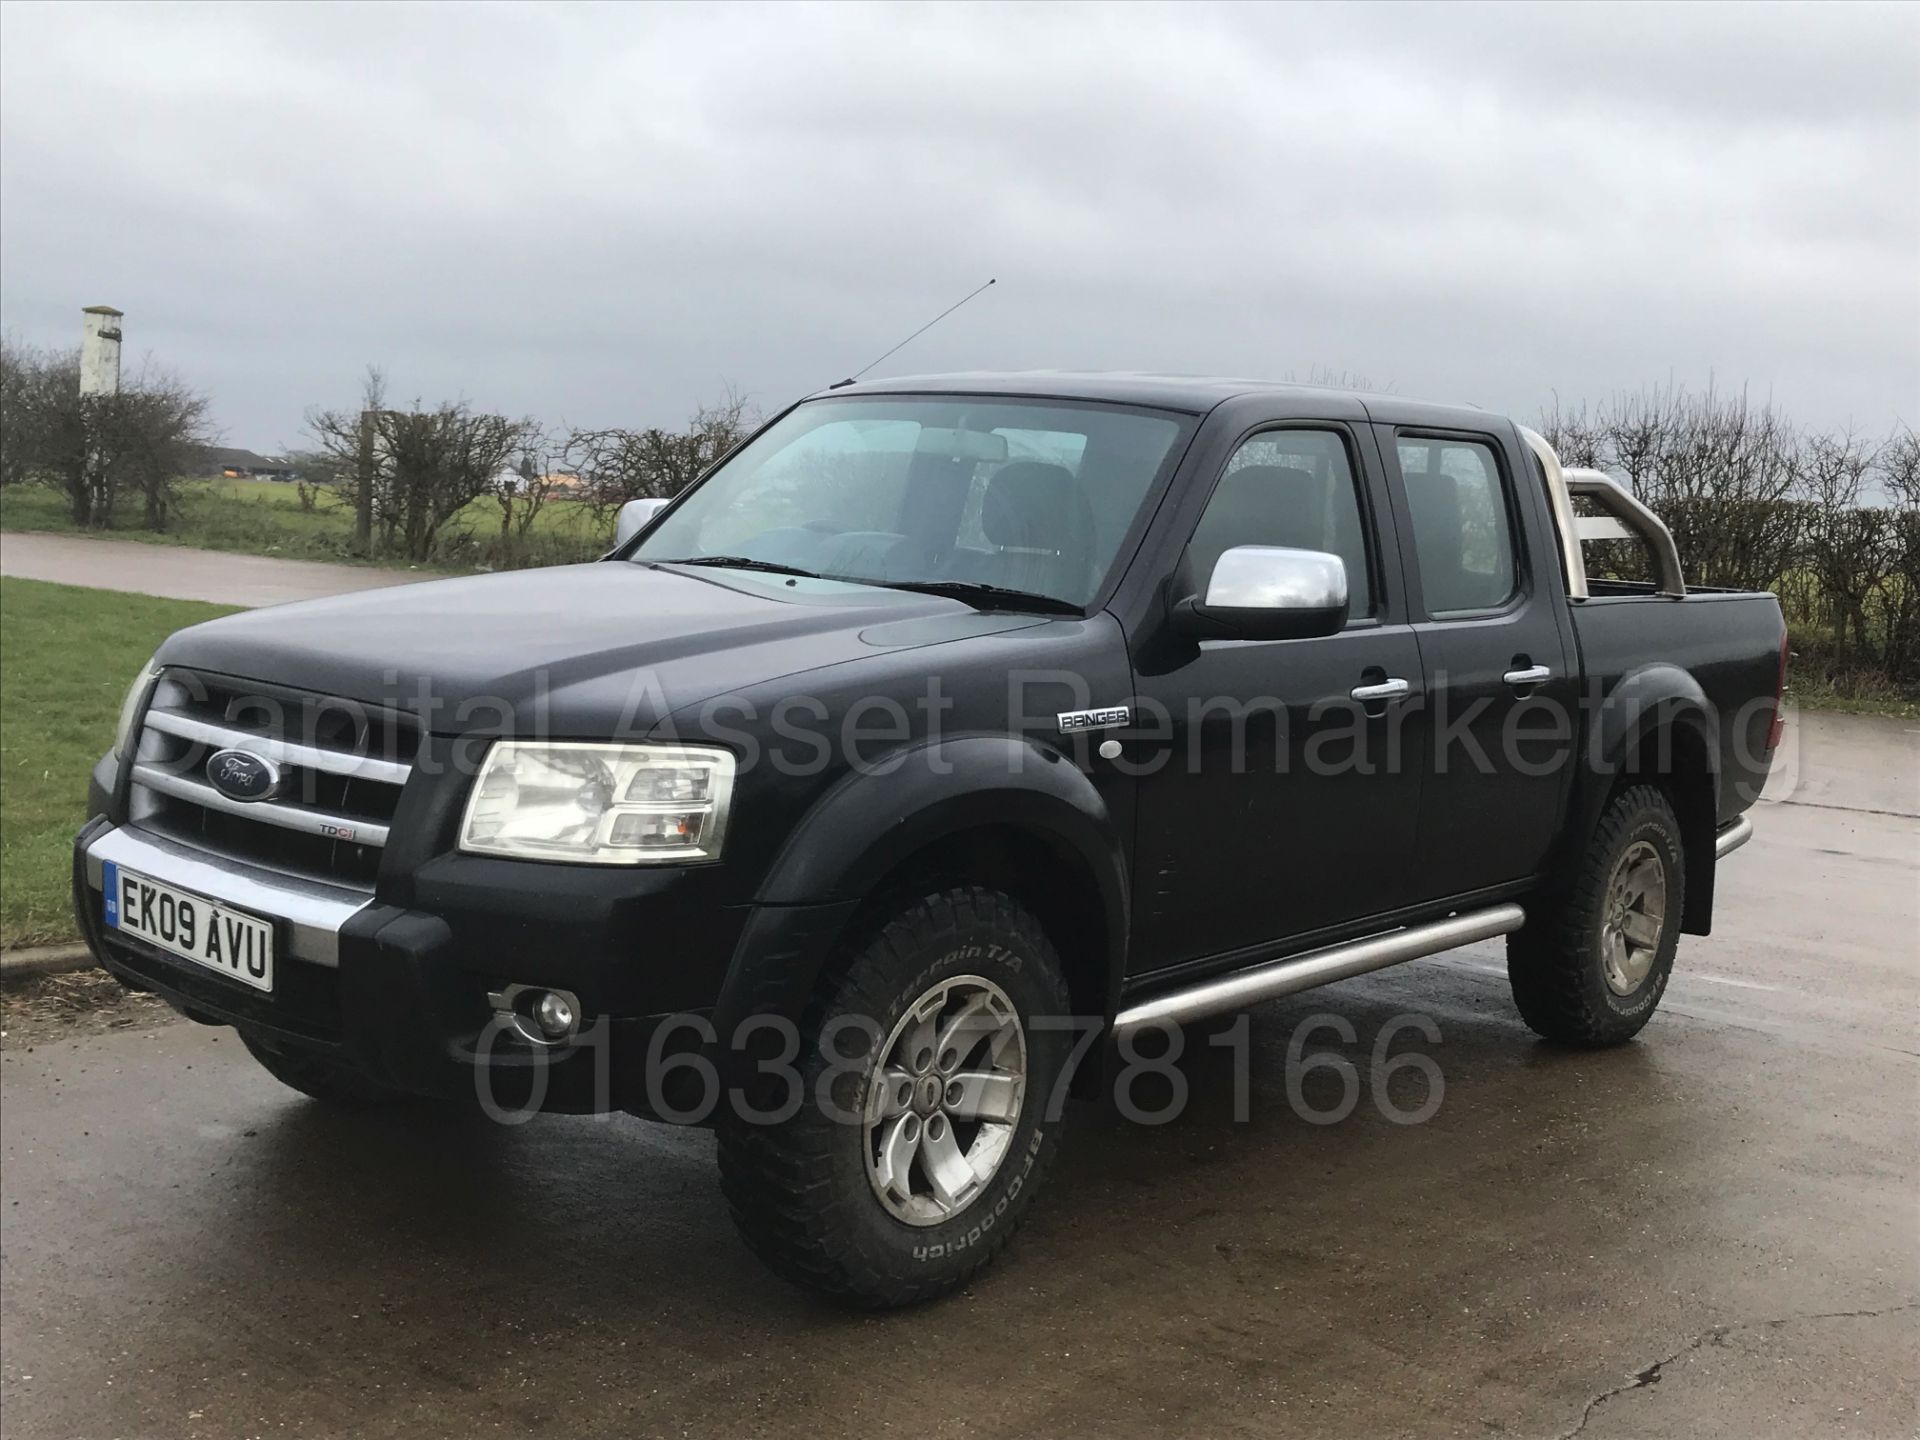 FORD RANGER 'THUNDER' DOUBLE CAB PICK-UP (2009 ) '2.5 TDCI - 143 BHP' *LEATHER - AIR CON* (NO VAT) - Image 2 of 29